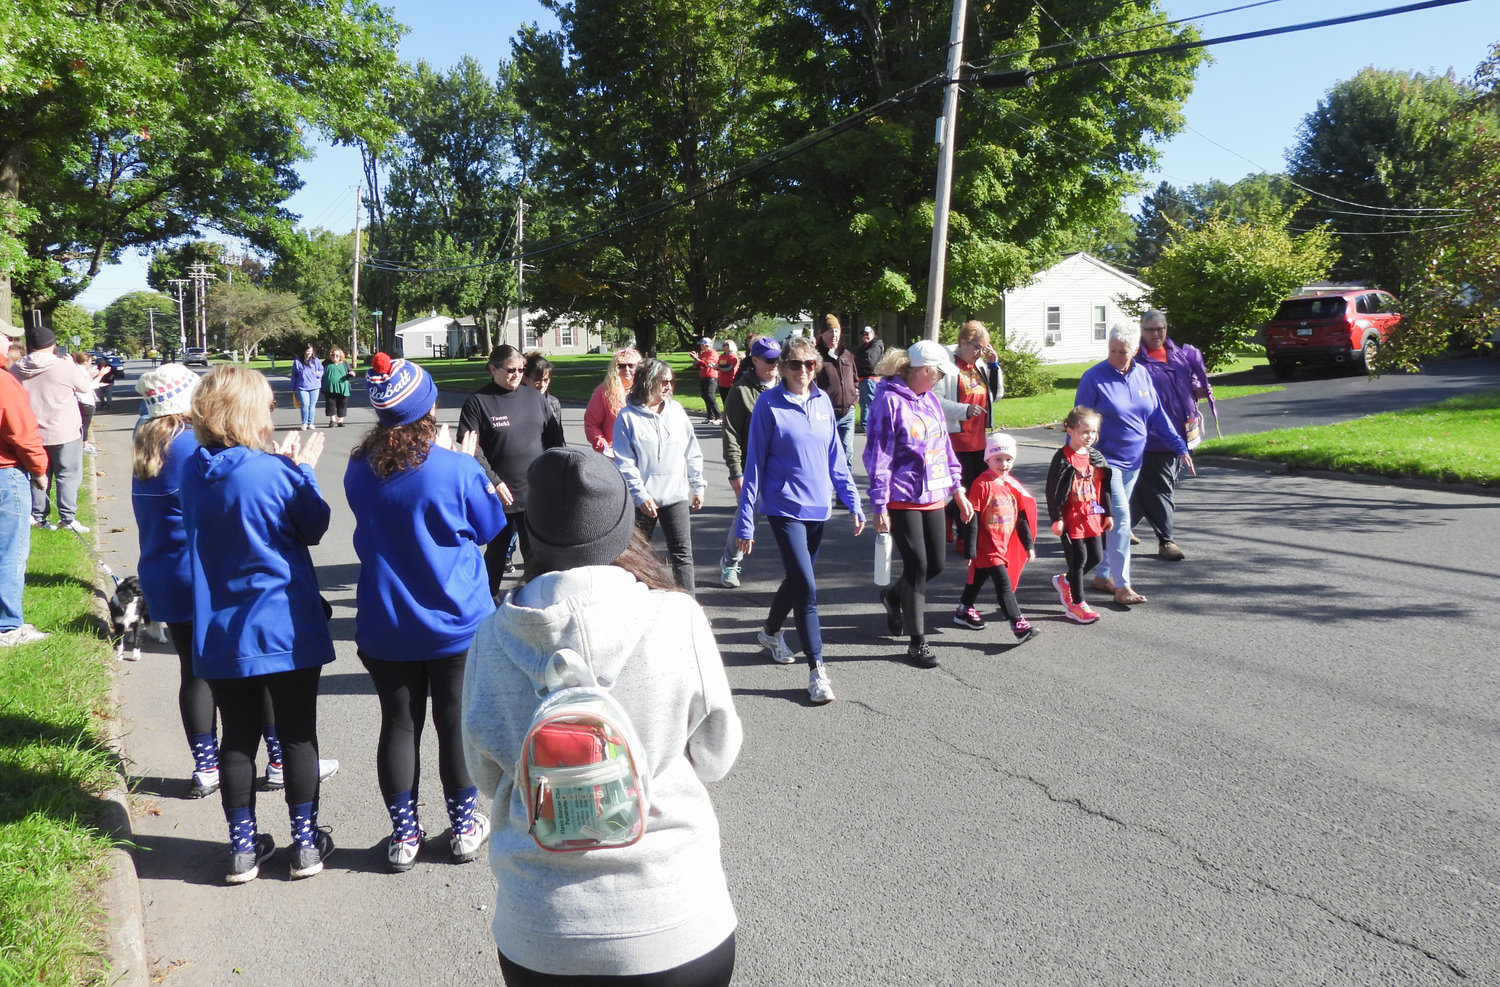 The Jessica's Hope Lap for Jessica's Heroes 5K Run and Walk on Saturday, Sept. 24 at Oneida High School saw local children and cancer survivors walk together in solidarity with the community cheering them on.